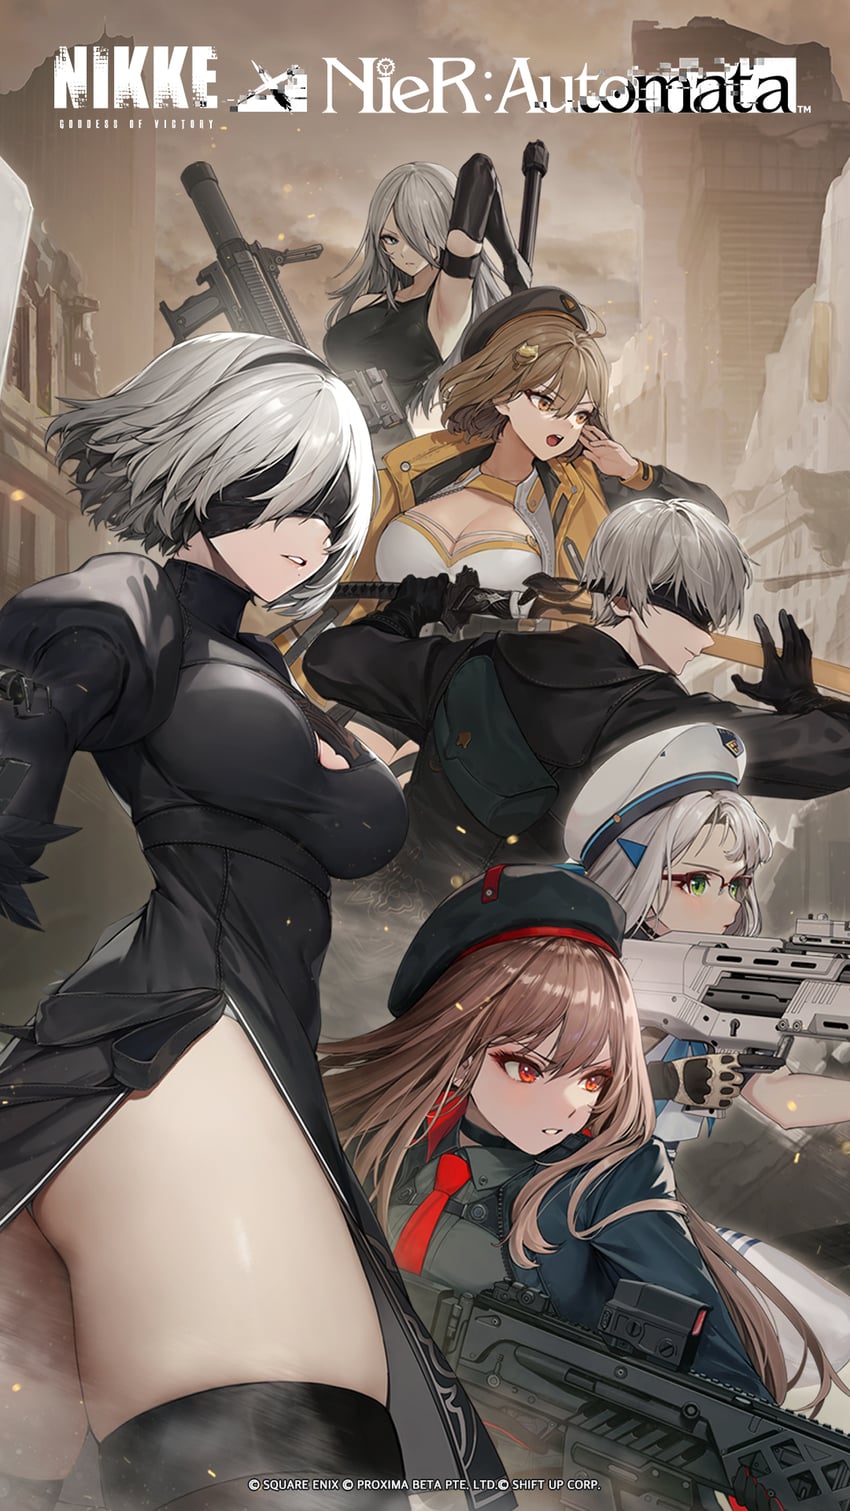 2b, 9s, a2, anis, rapi, and 2 more (nier and 2 more)